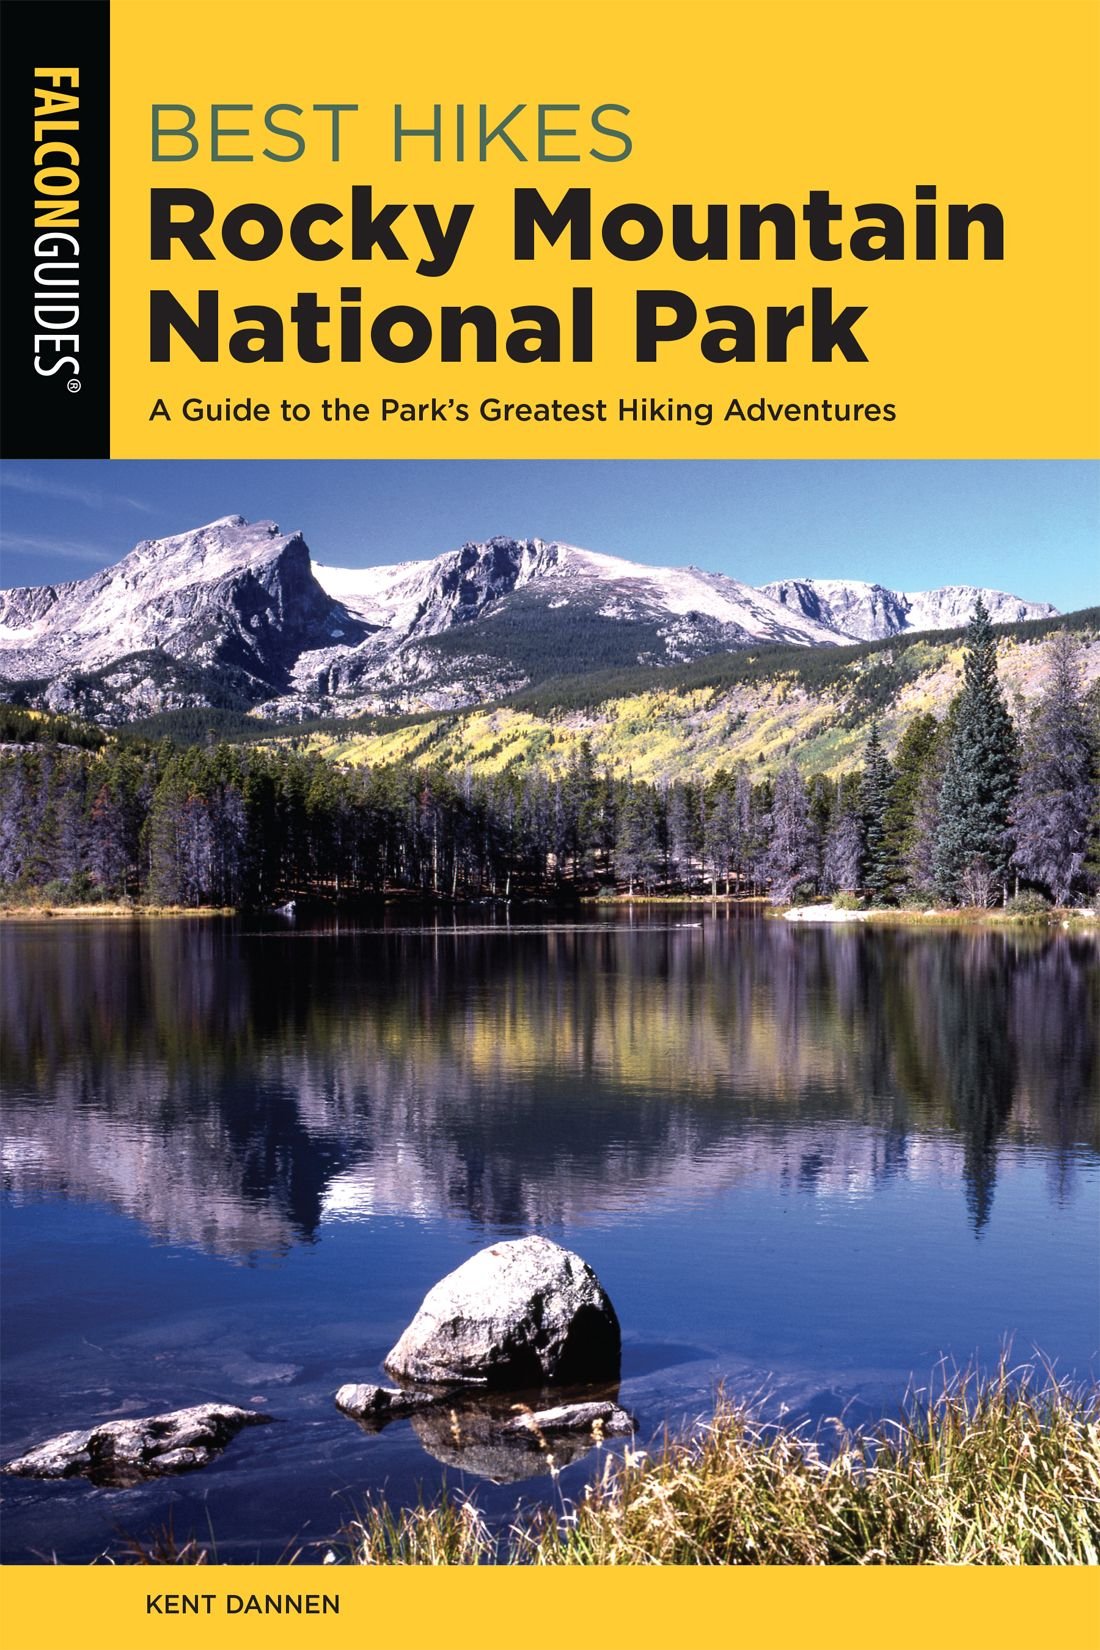 Best Hikes Rocky Mountain National Park: A Guide to the Park's Greatest ...